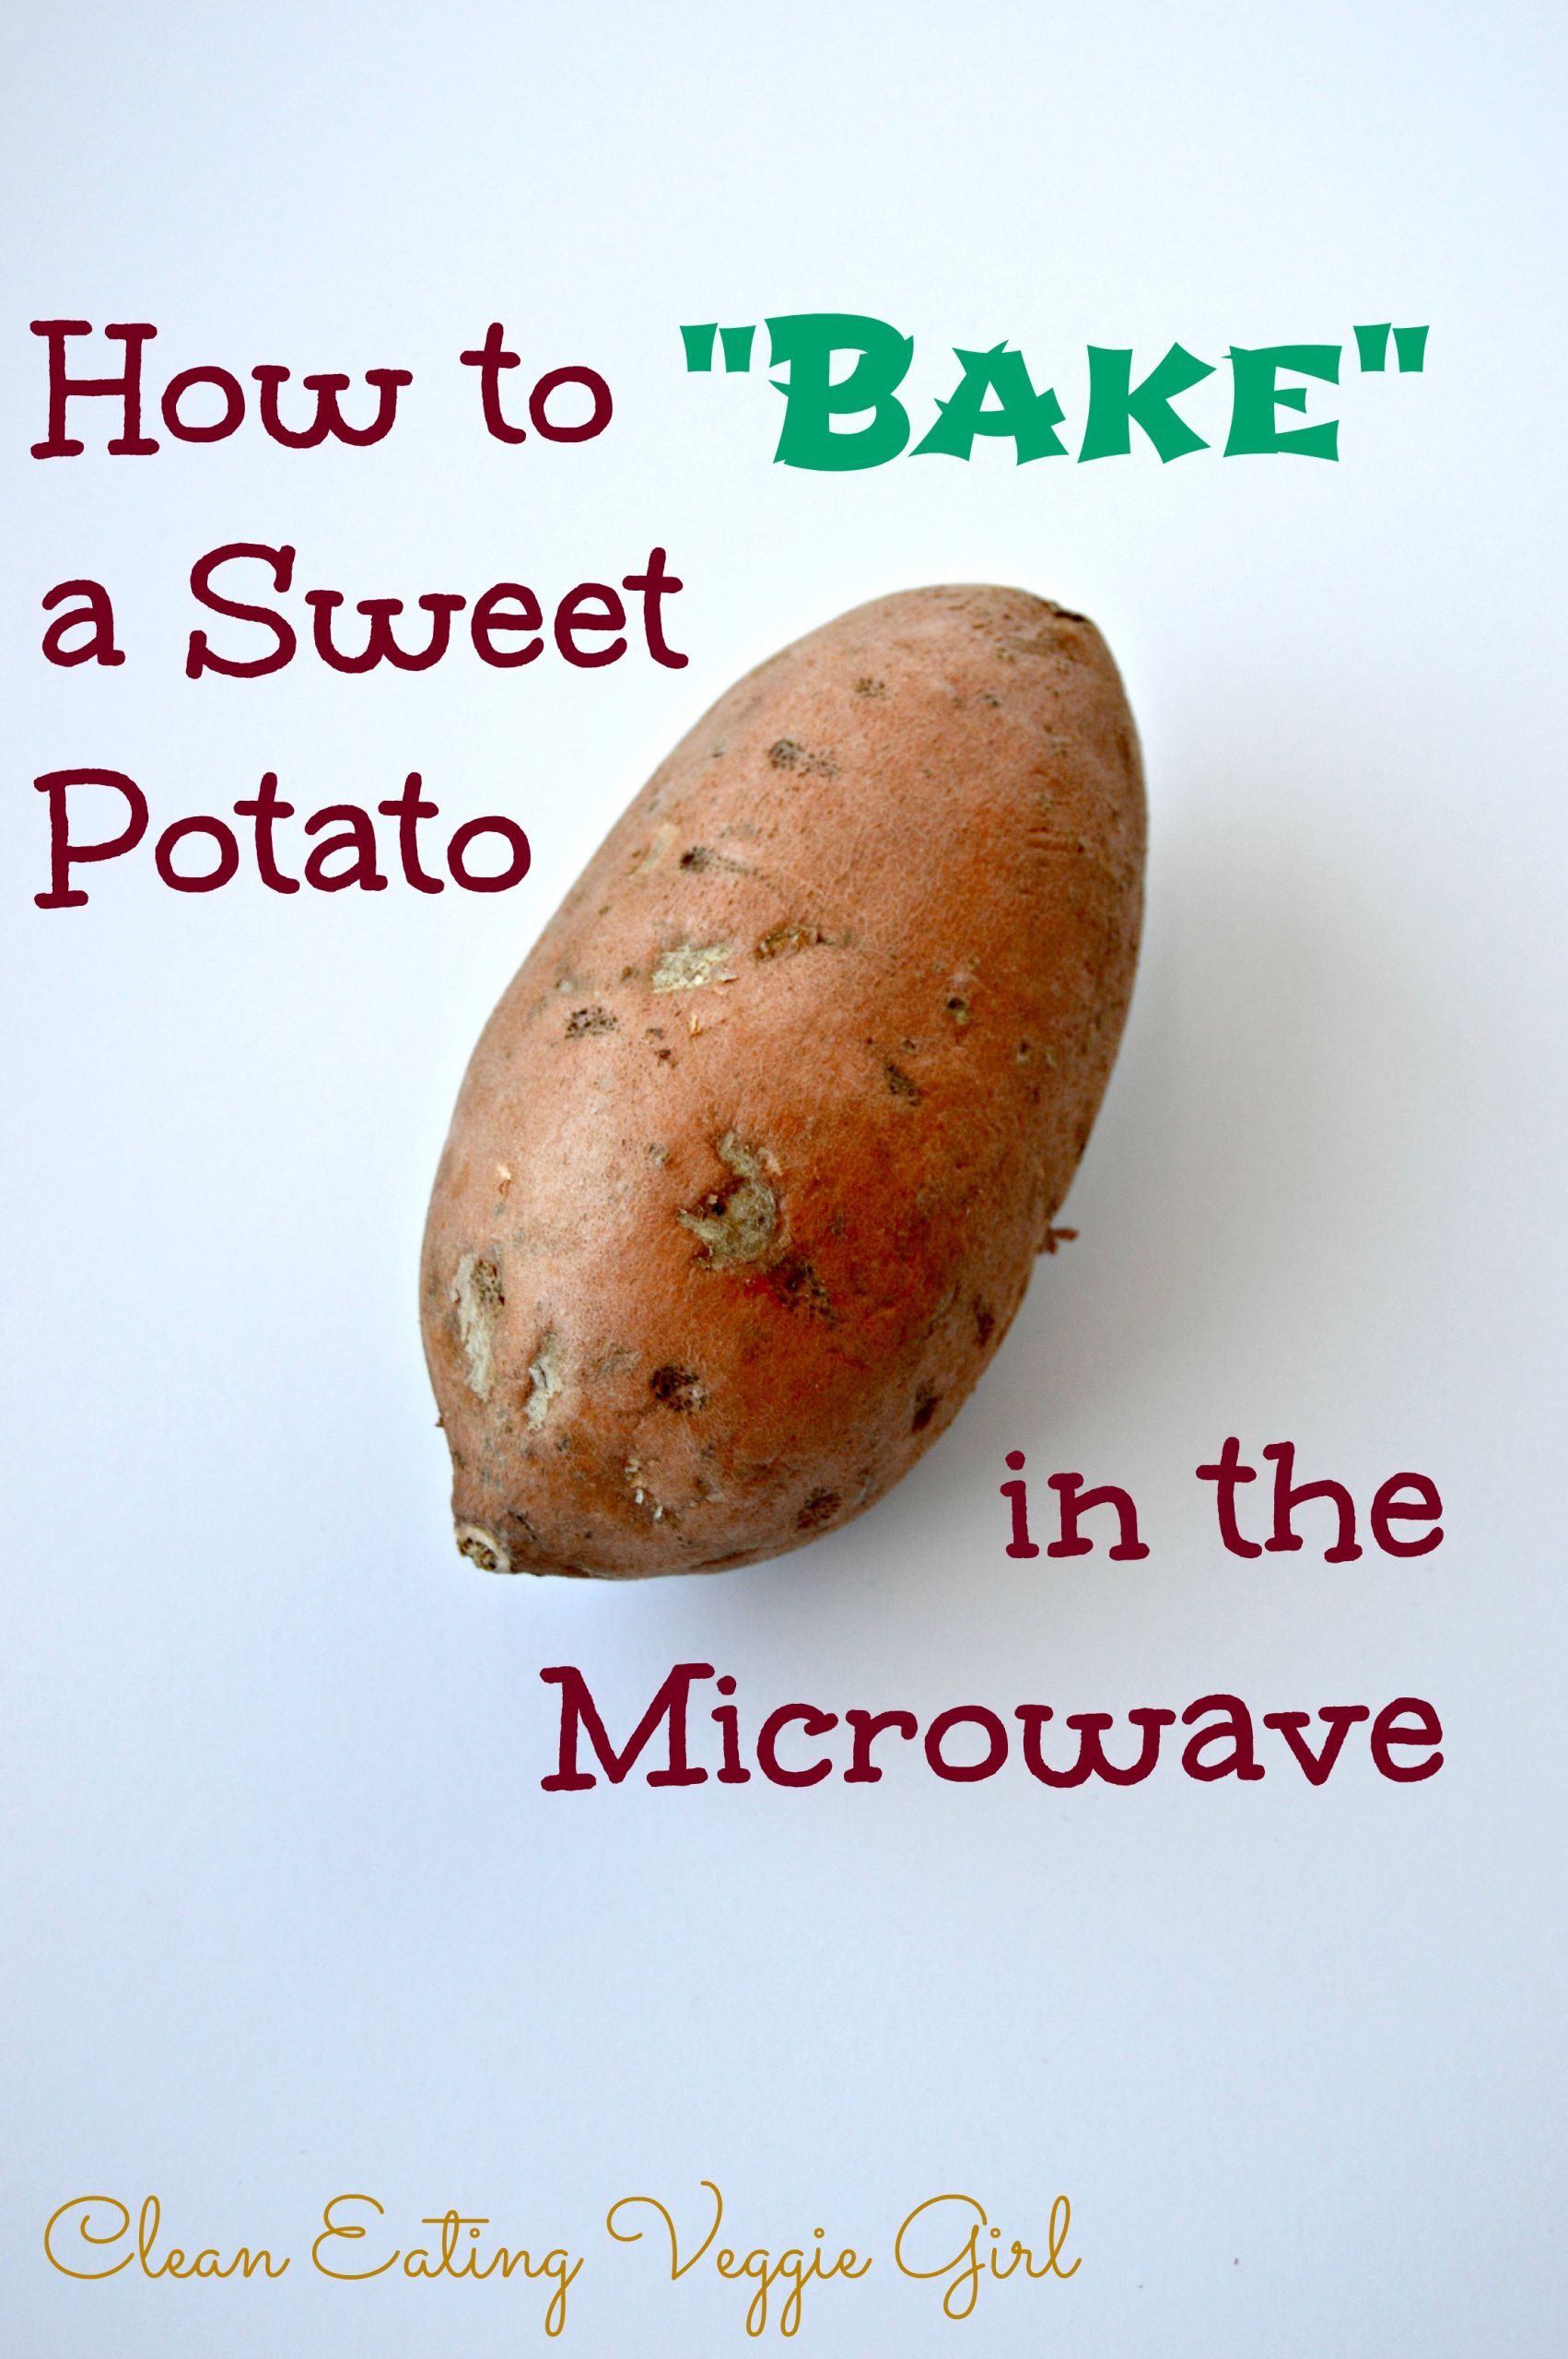 Cooking Sweet Potato In Microwave
 How to Make a Baked Sweet Potato in the Microwave Clean